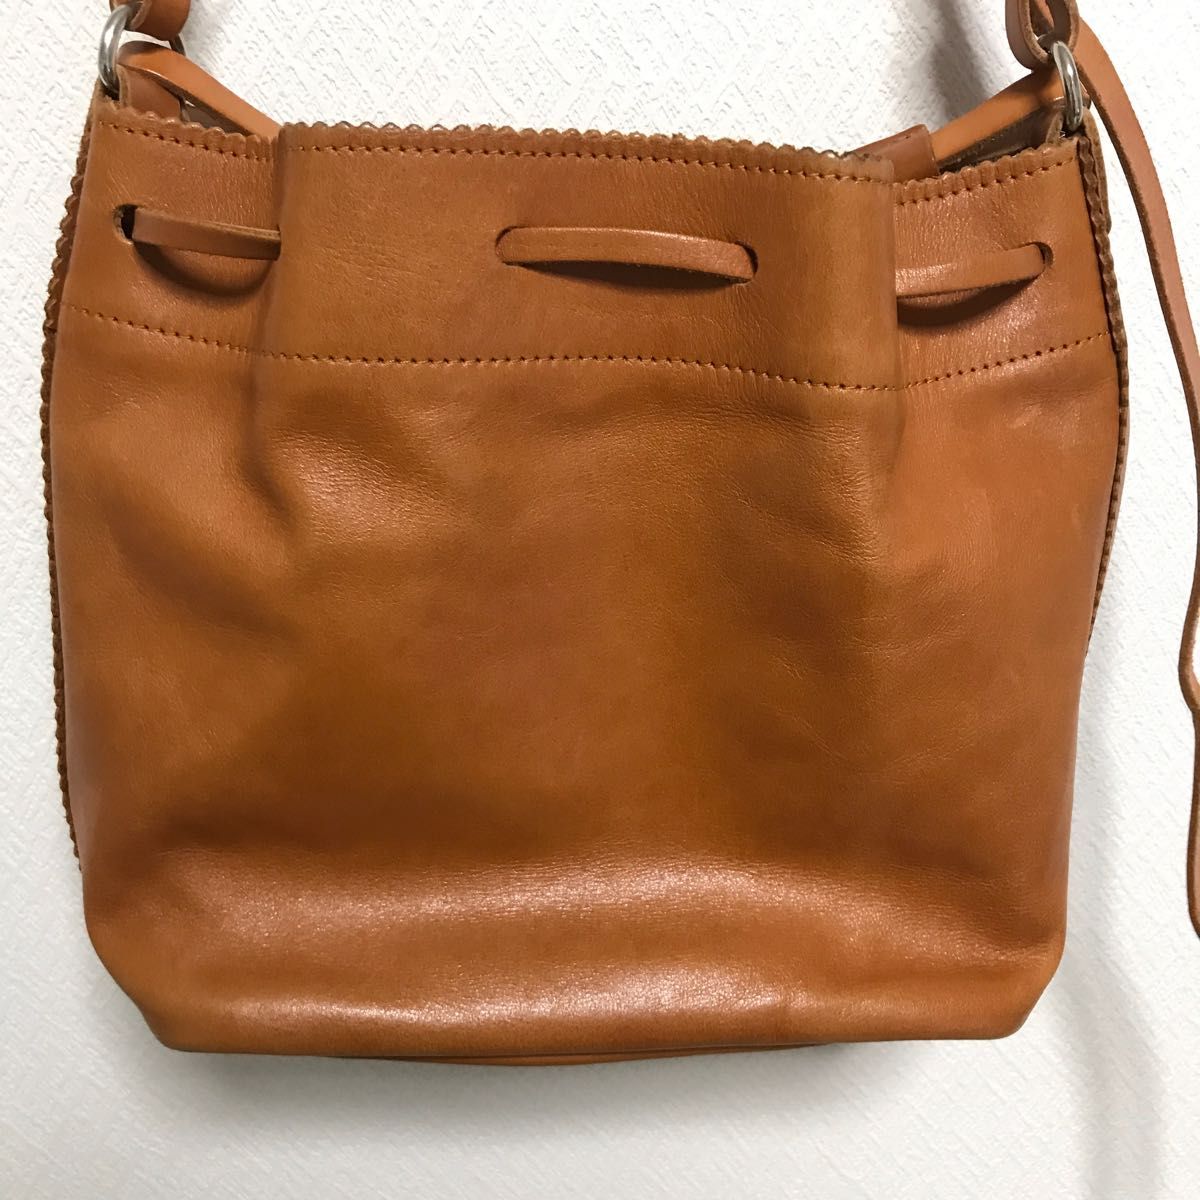 atelier jack gomme bag 2way バッグ ショルダーバッグ ハンドバッグ 